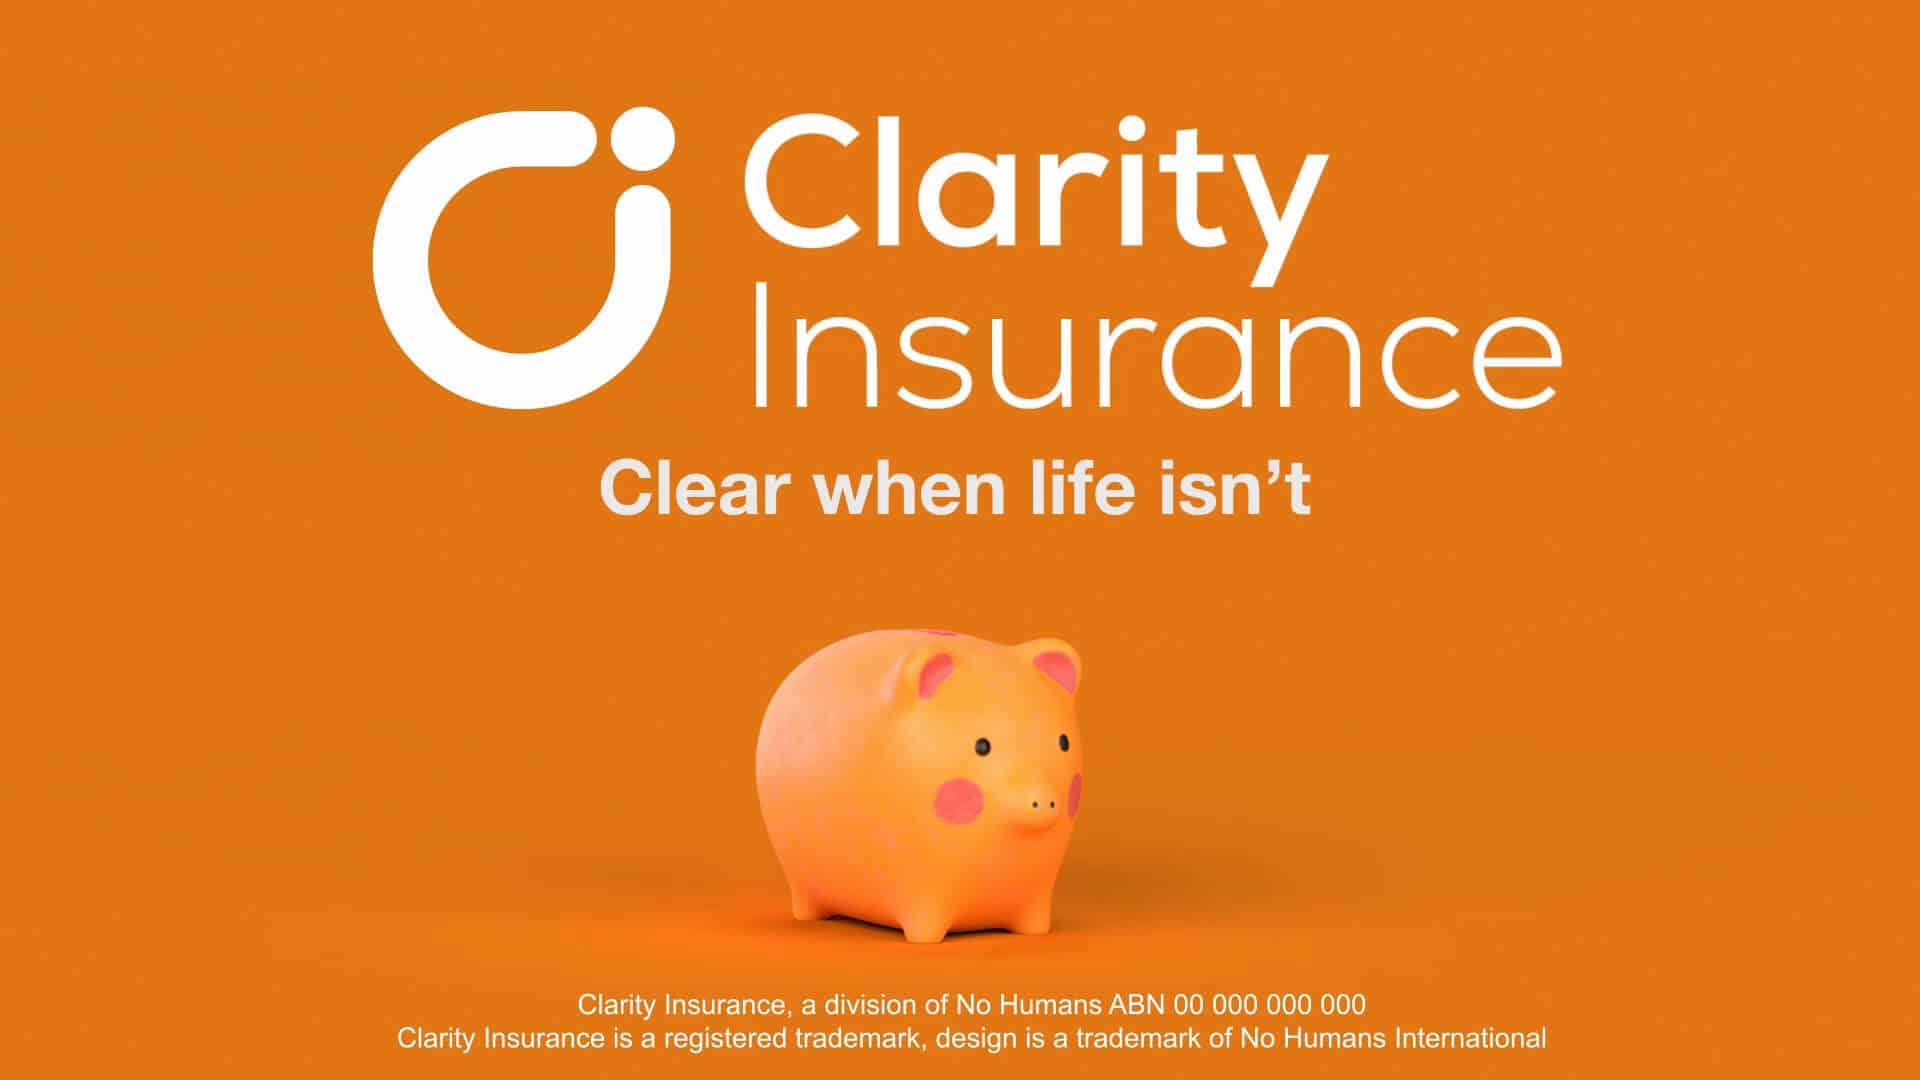 Clarity Insurance by Team No humans